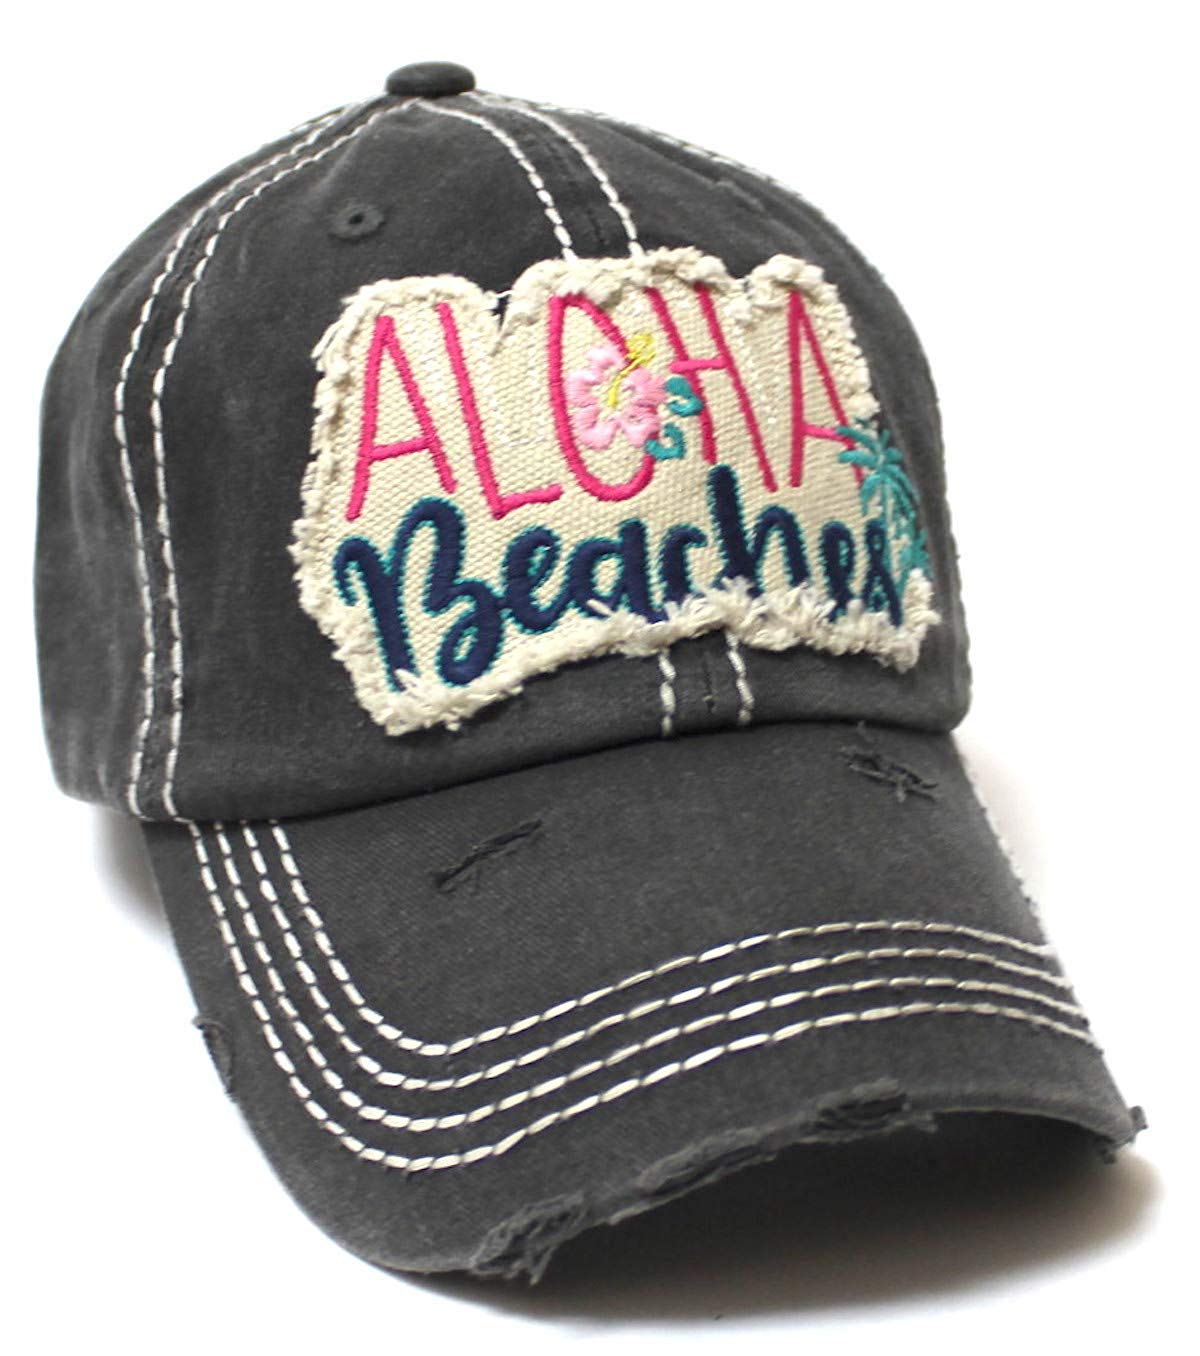 Aloha Beaches Patch Embroidery Distressed Baseball Hat, Vintage Black - Caps 'N Vintage 